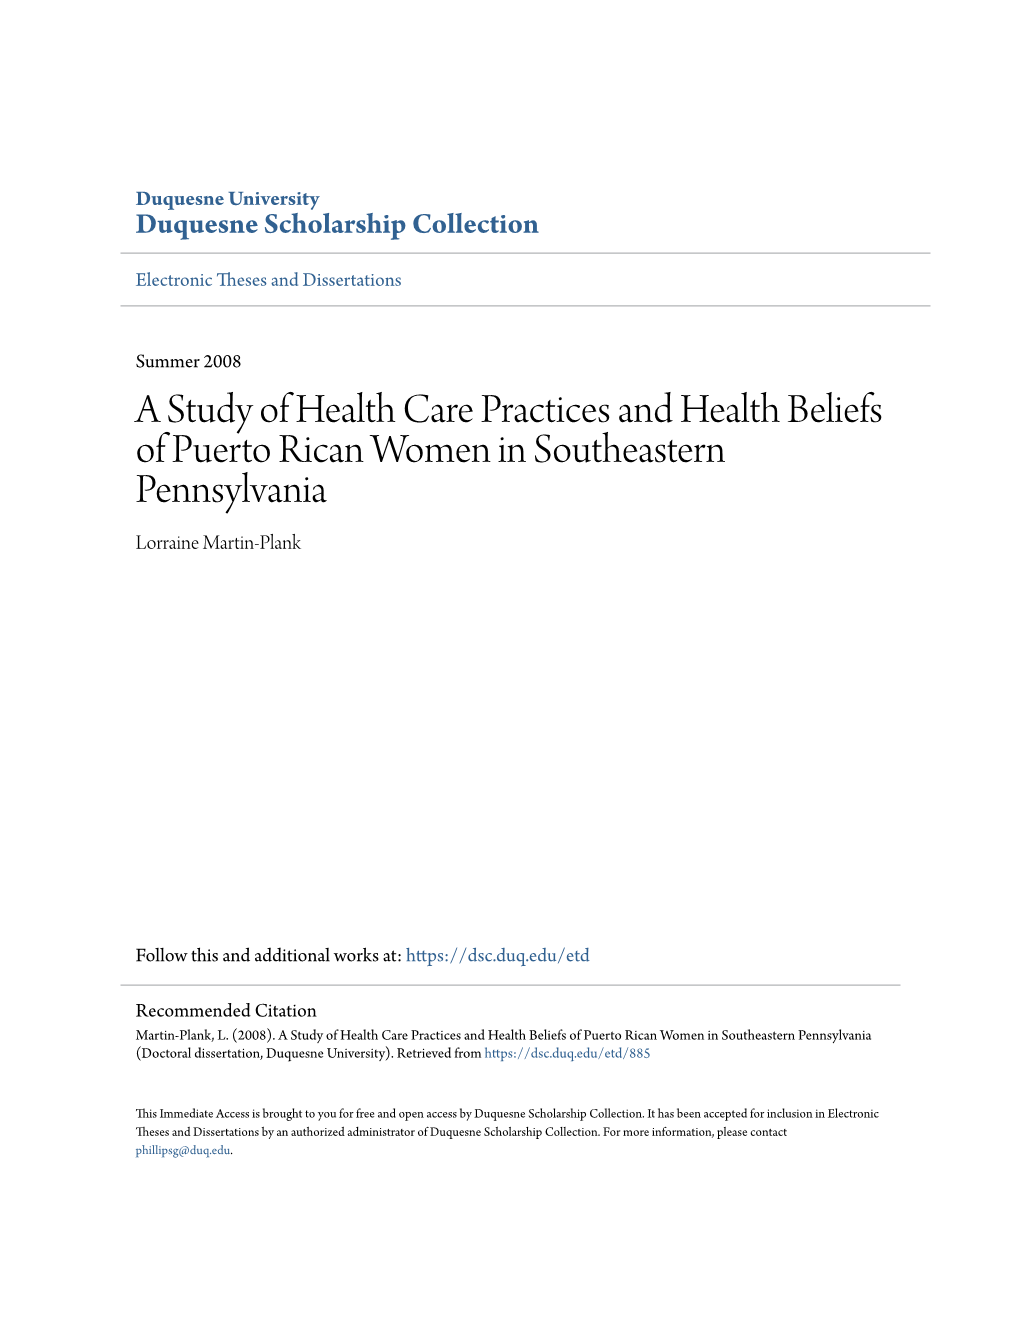 A Study of Health Care Practices and Health Beliefs of Puerto Rican Women in Southeastern Pennsylvania Lorraine Martin-Plank